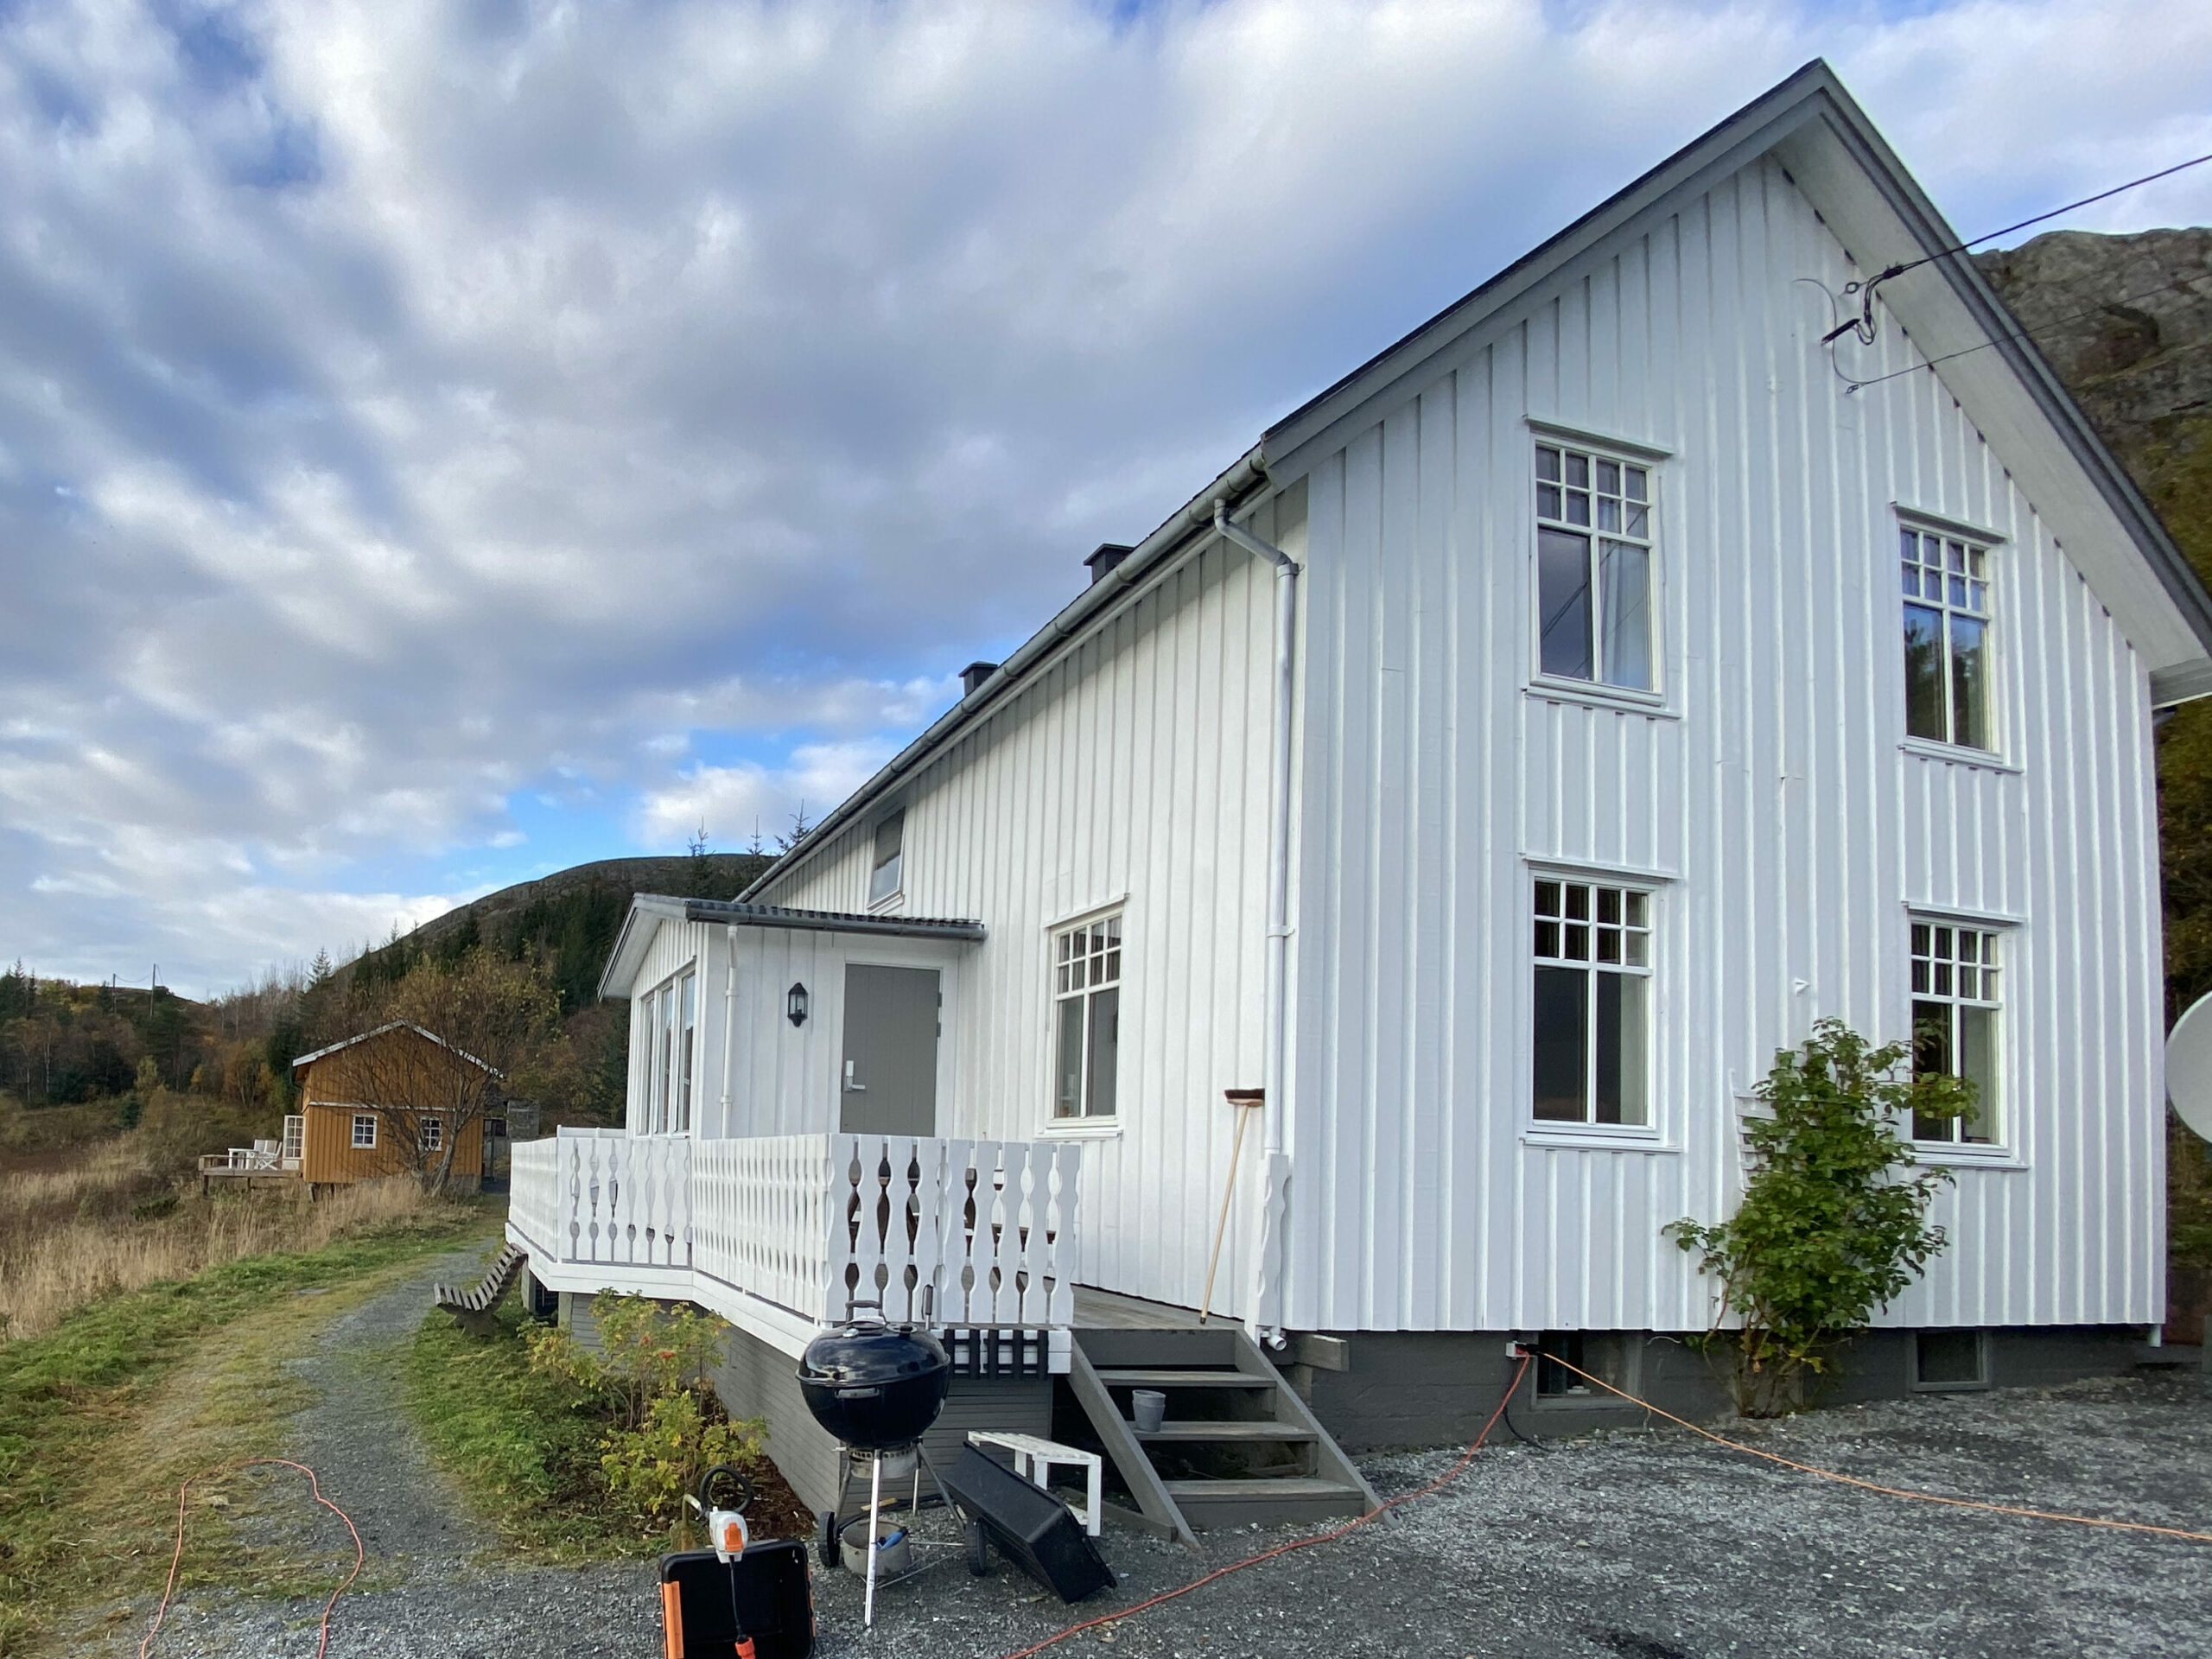 The White House as a part of Tjongsfjord Lodge